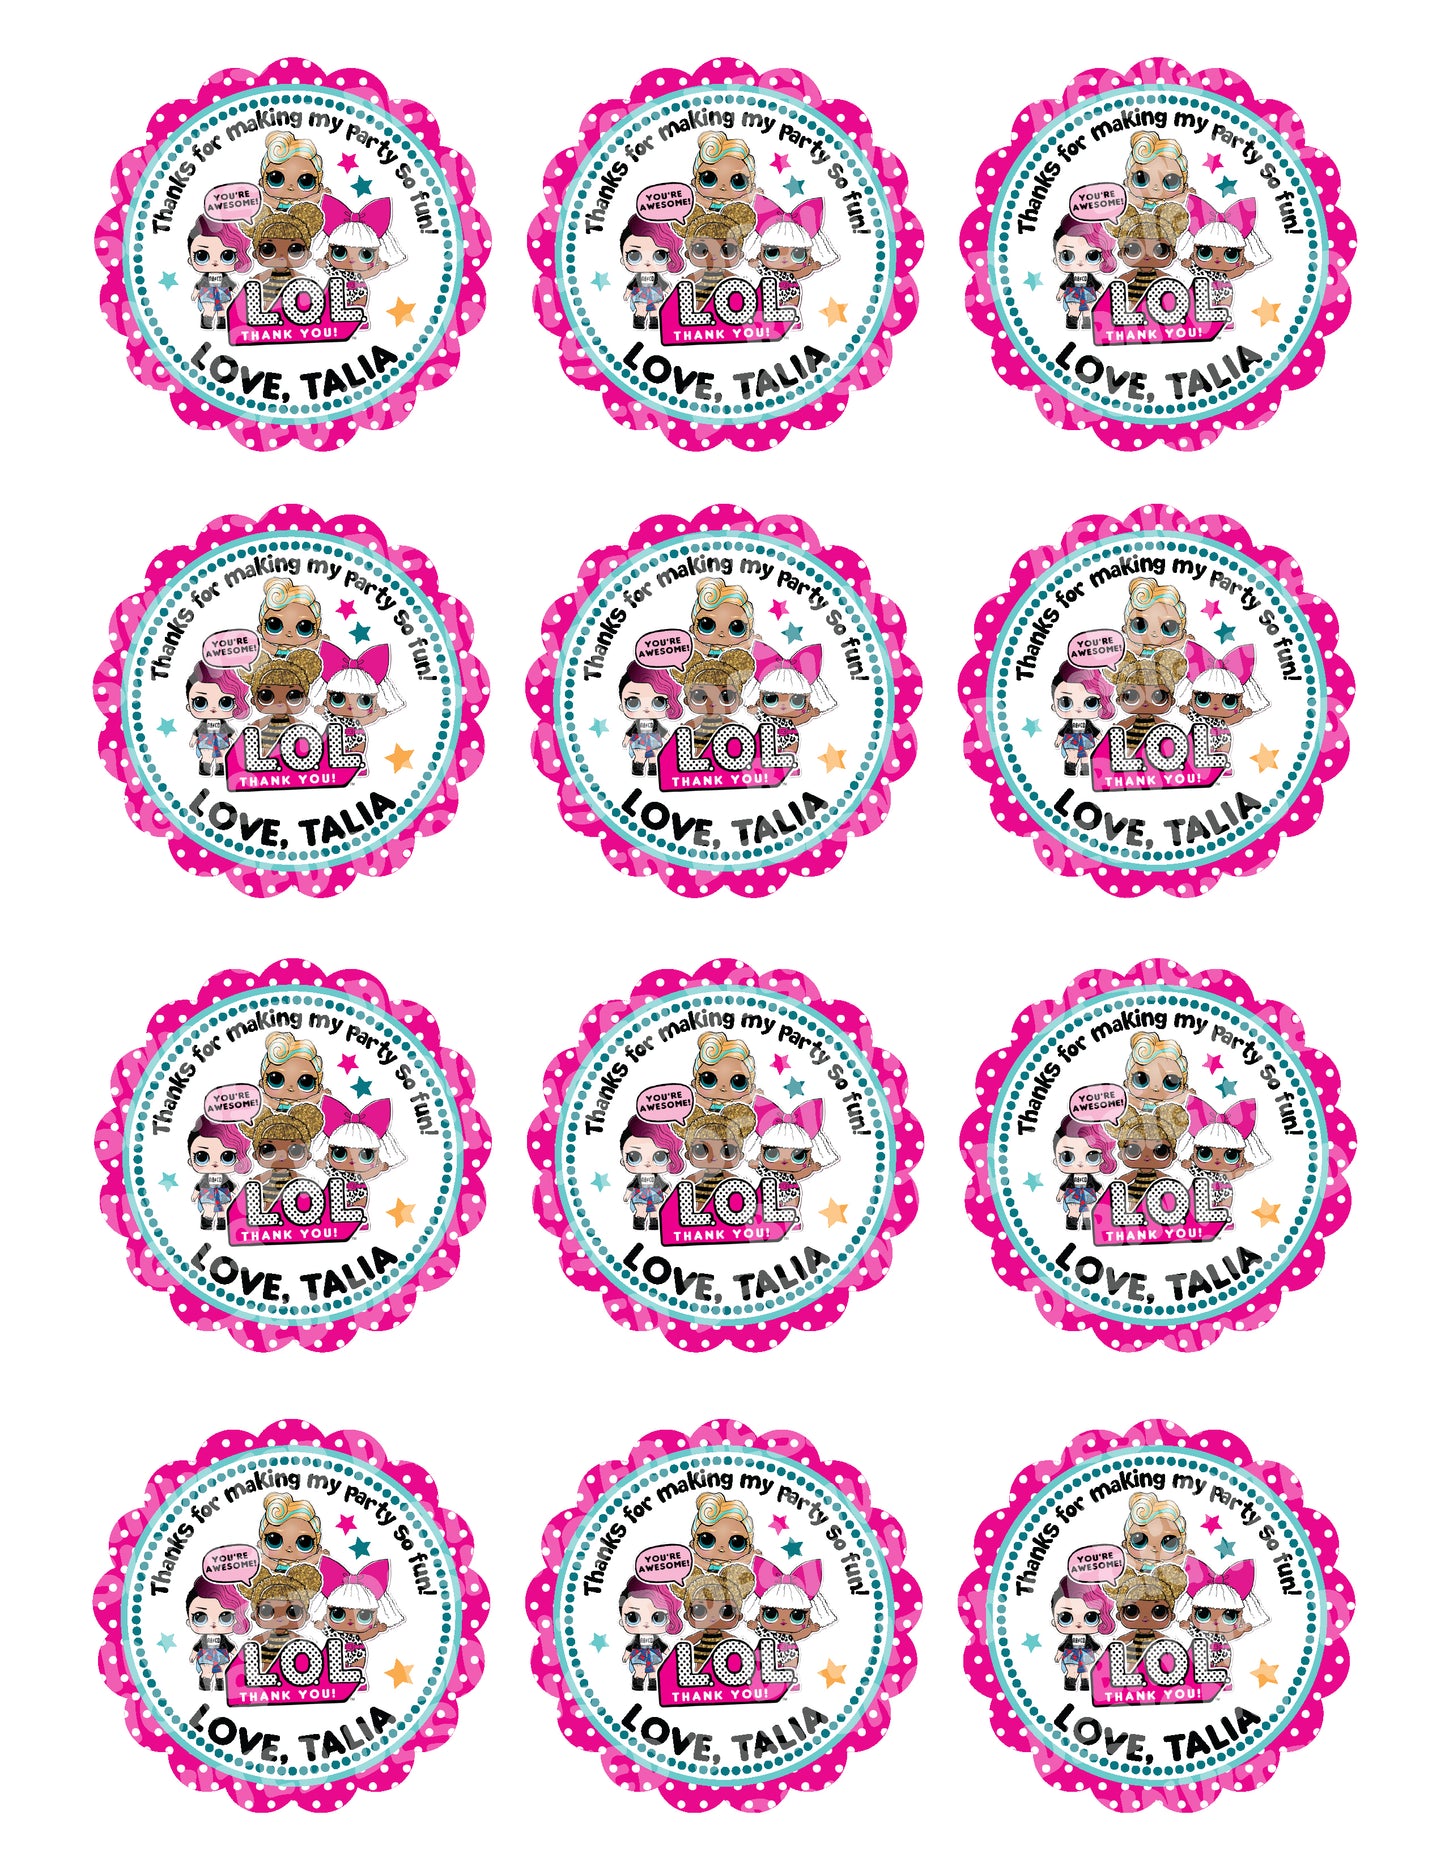 LOL DOLLS Custom Personalized Stickers for Gift Bags, Party Favors! Printed or Digital!